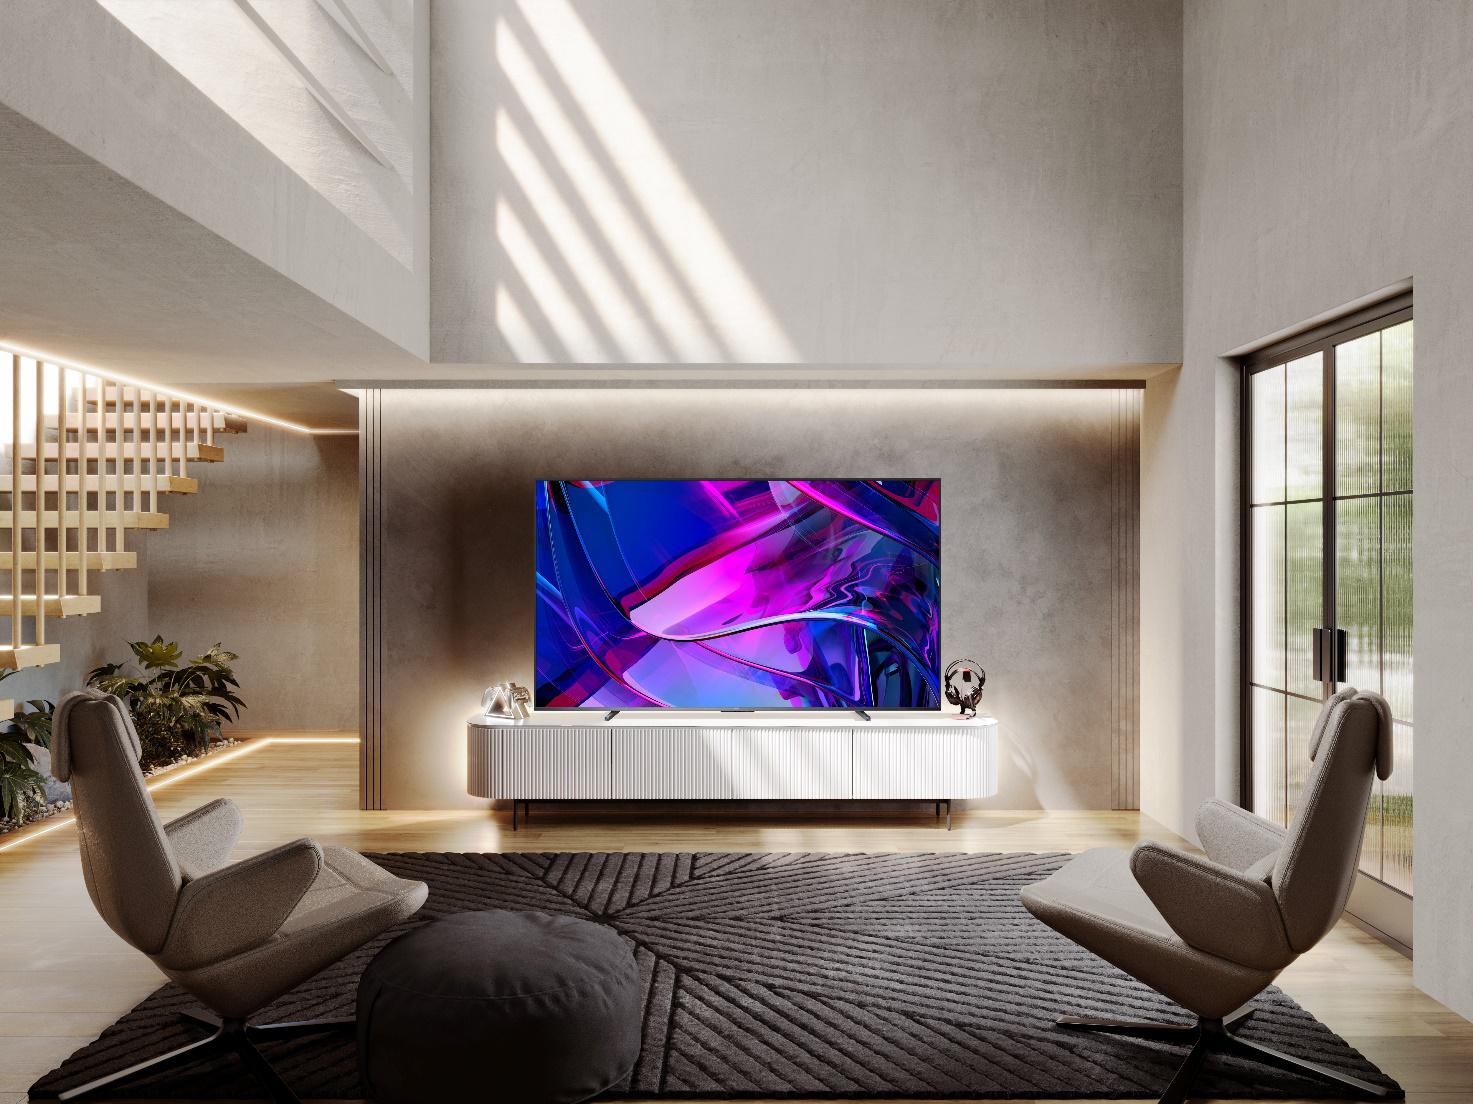 Hisense introduces new TV featuring QLED technology and 100-inch screen